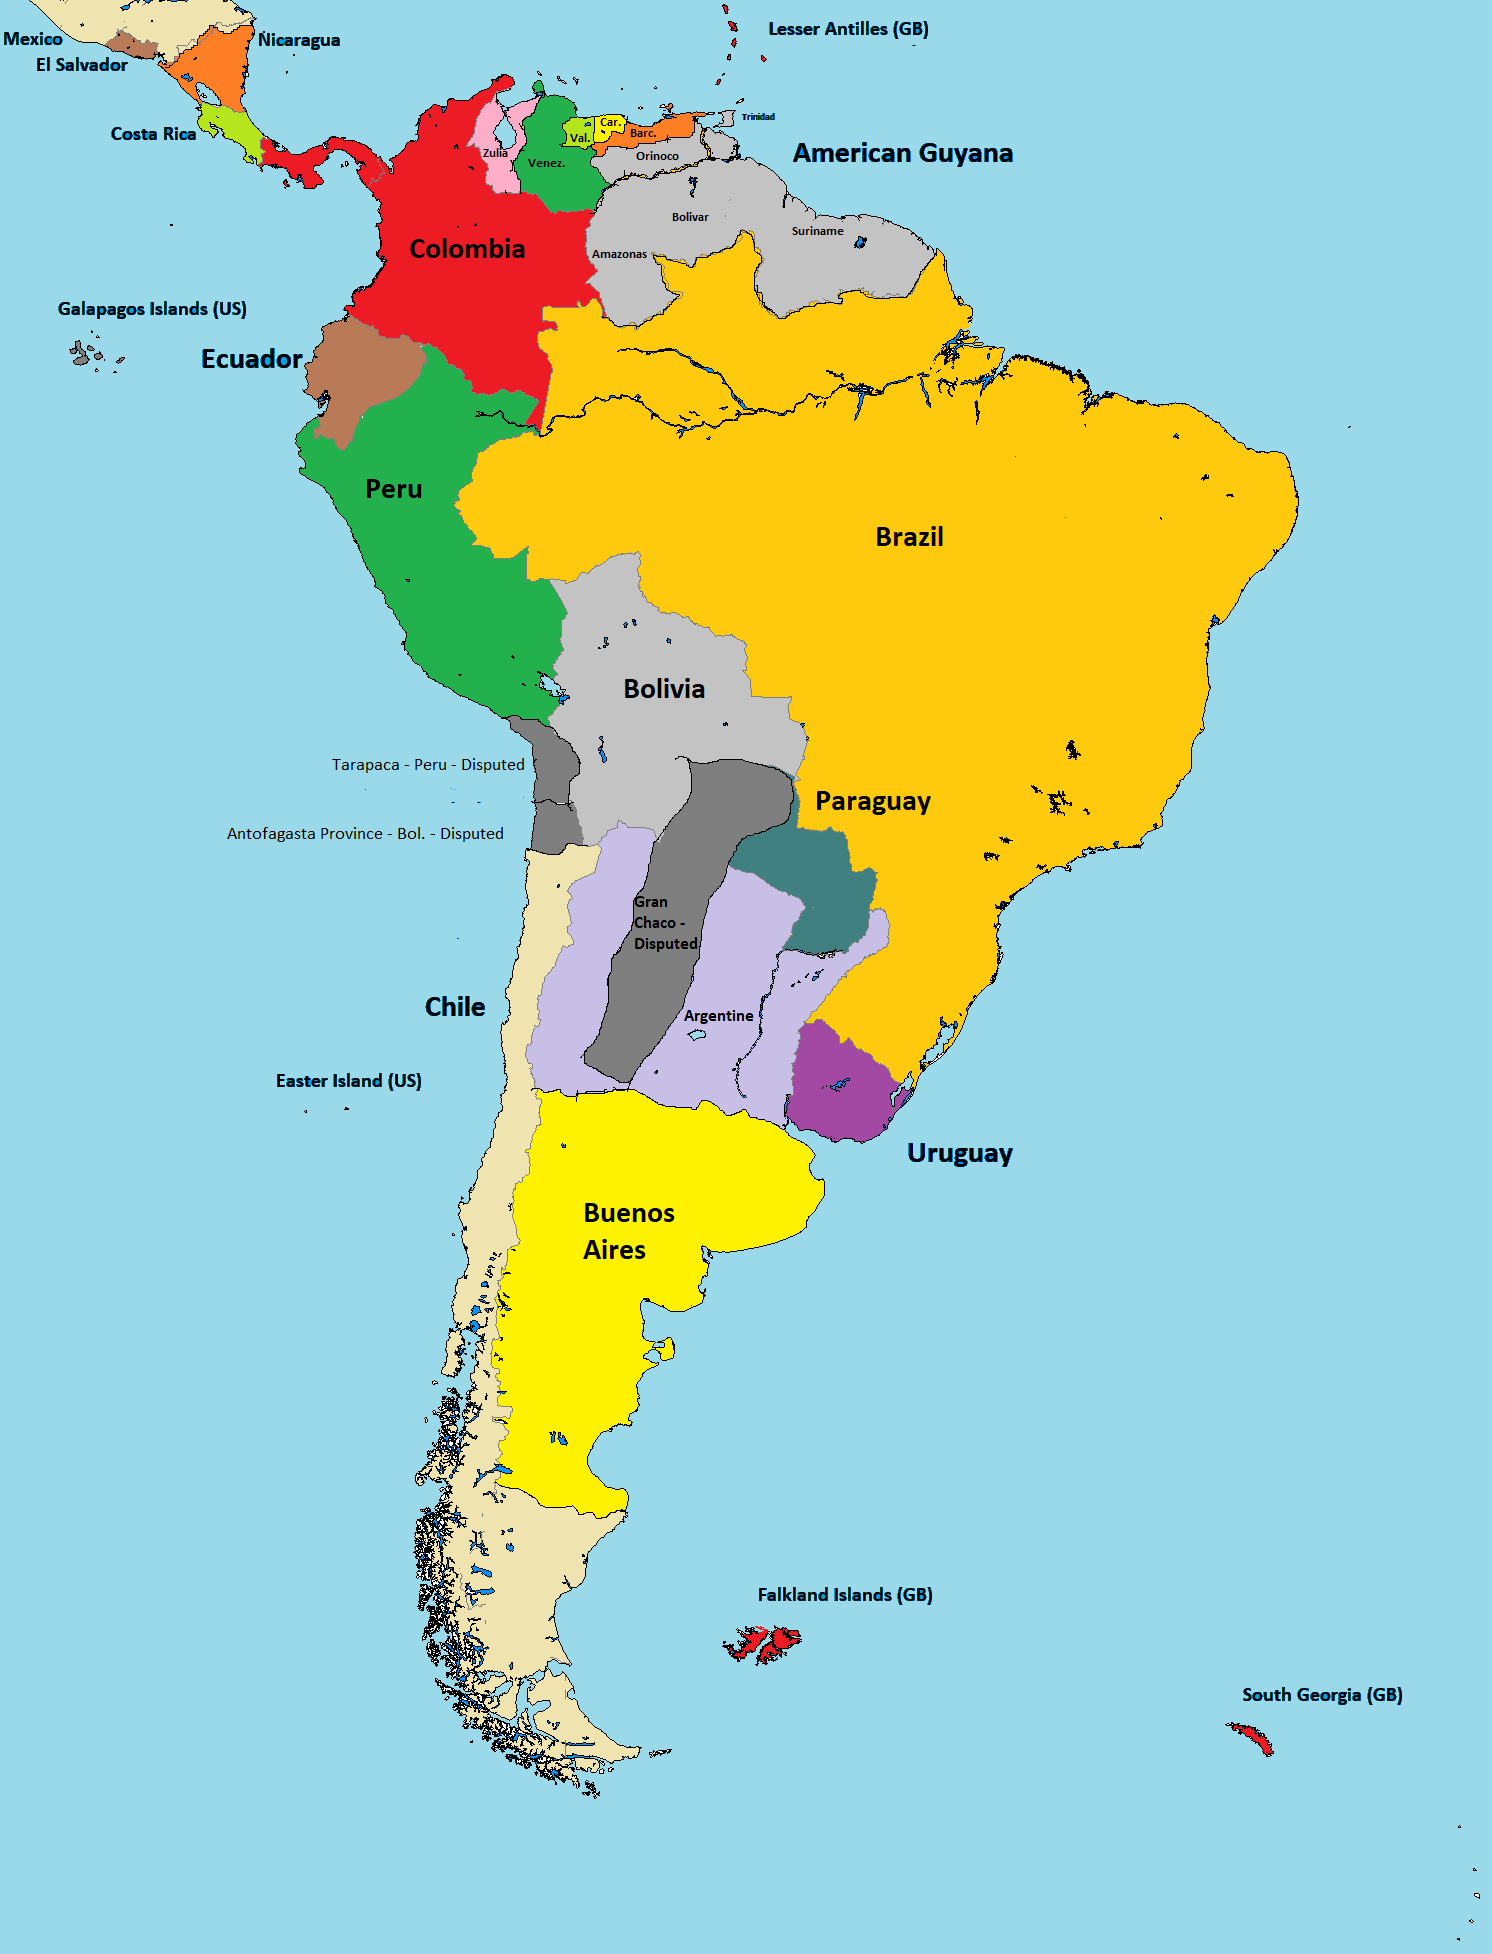 Fenians - Map of South America - 1892.png